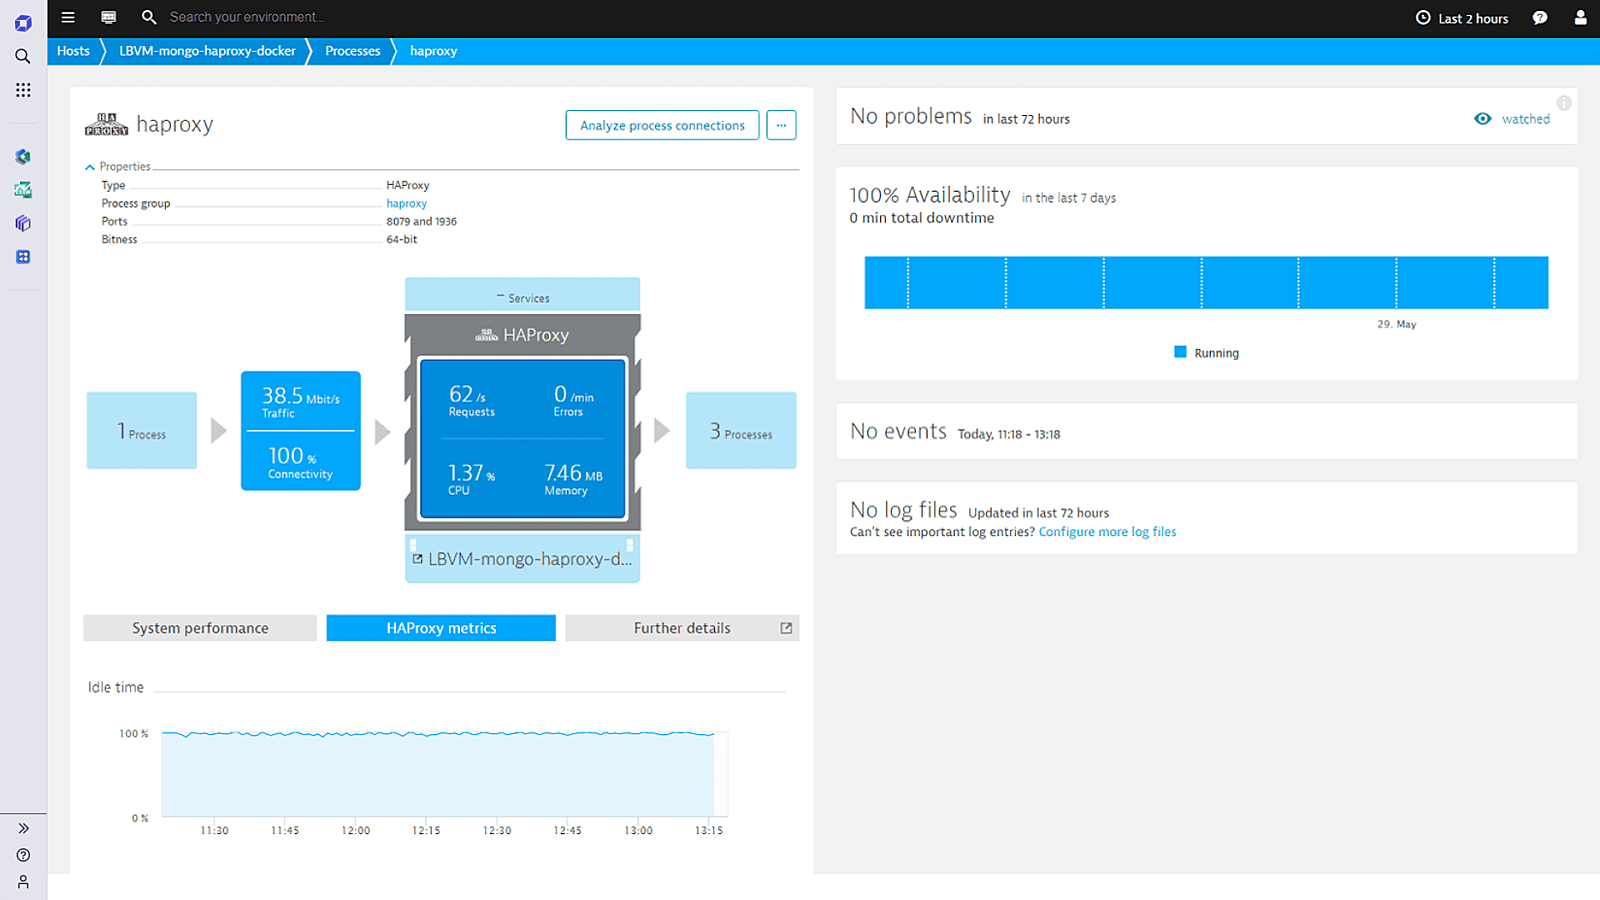 Process monitoring of haproxy in Dynatrace screenshot